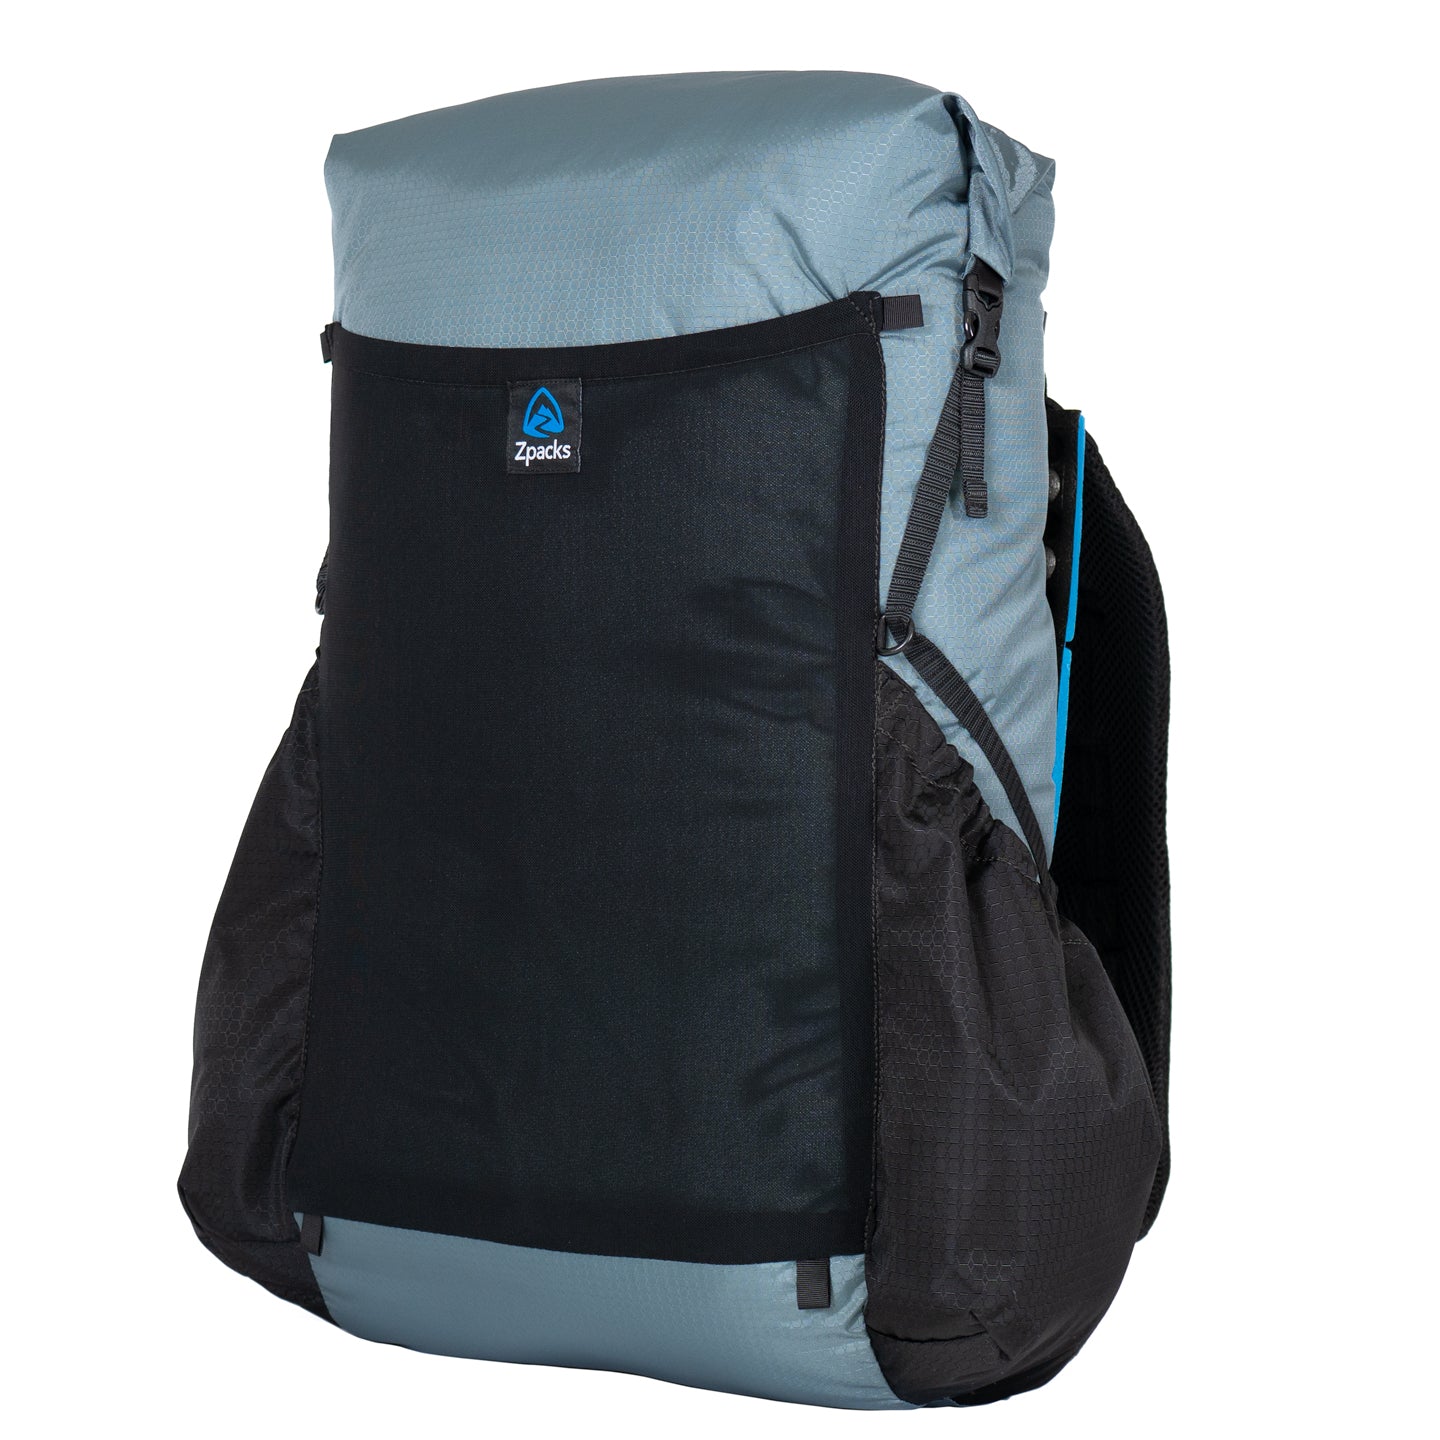 Zpacks Sub-Nero Backpack 30L robic ブラック | camillevieraservices.com